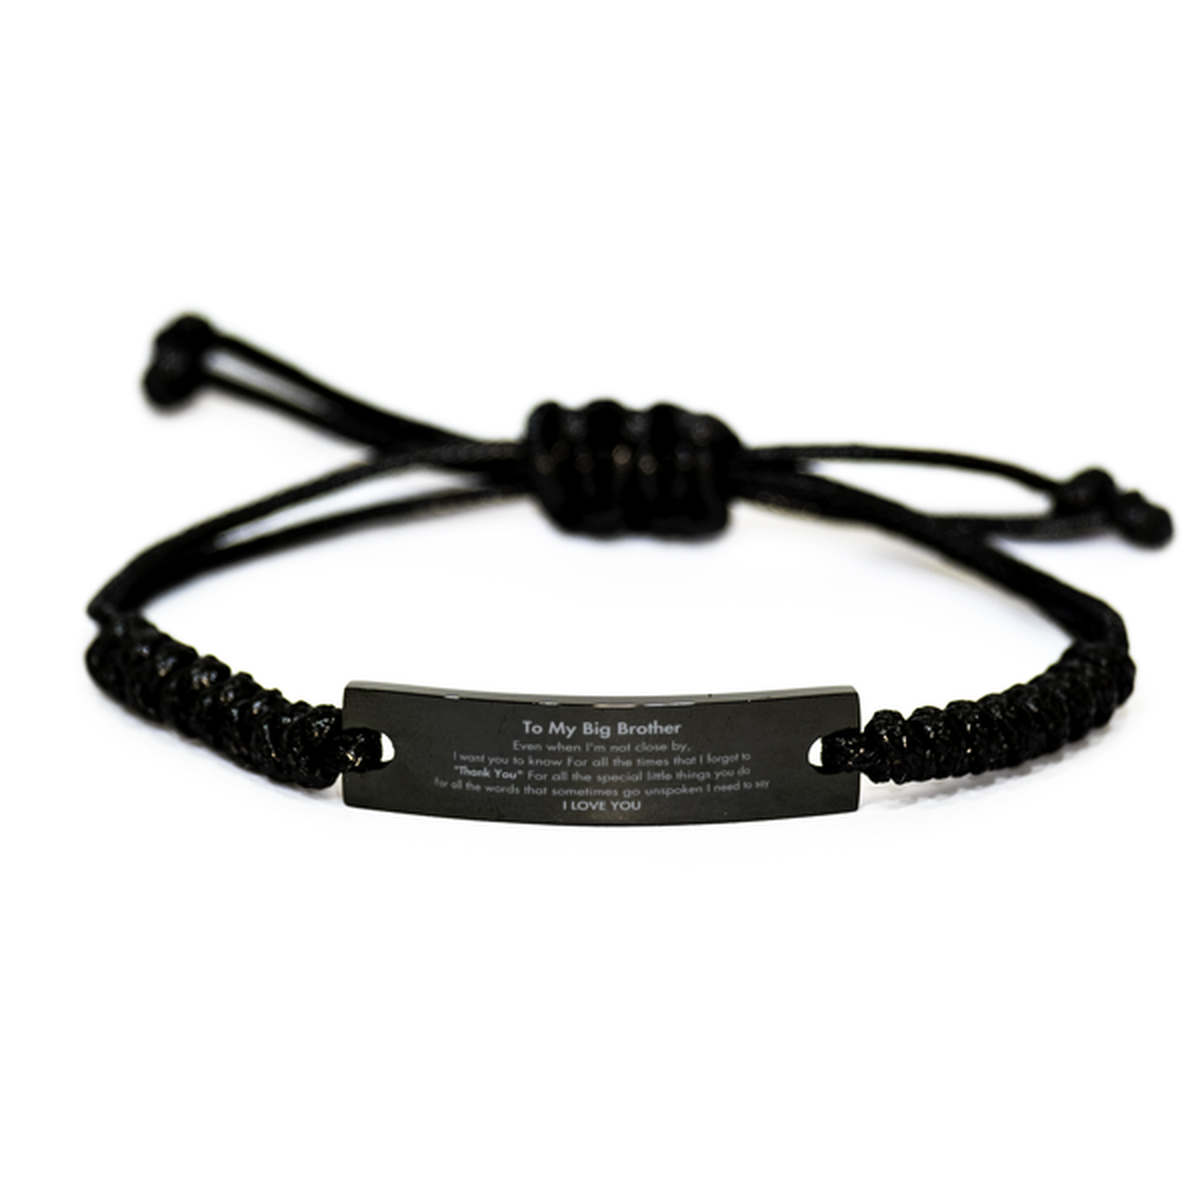 Thank You Gifts for Big Brother, Keepsake Black Rope Bracelet Gifts for Big Brother Birthday Mother's day Father's Day Big Brother For all the words That sometimes go unspoken I need to say I LOVE YOU